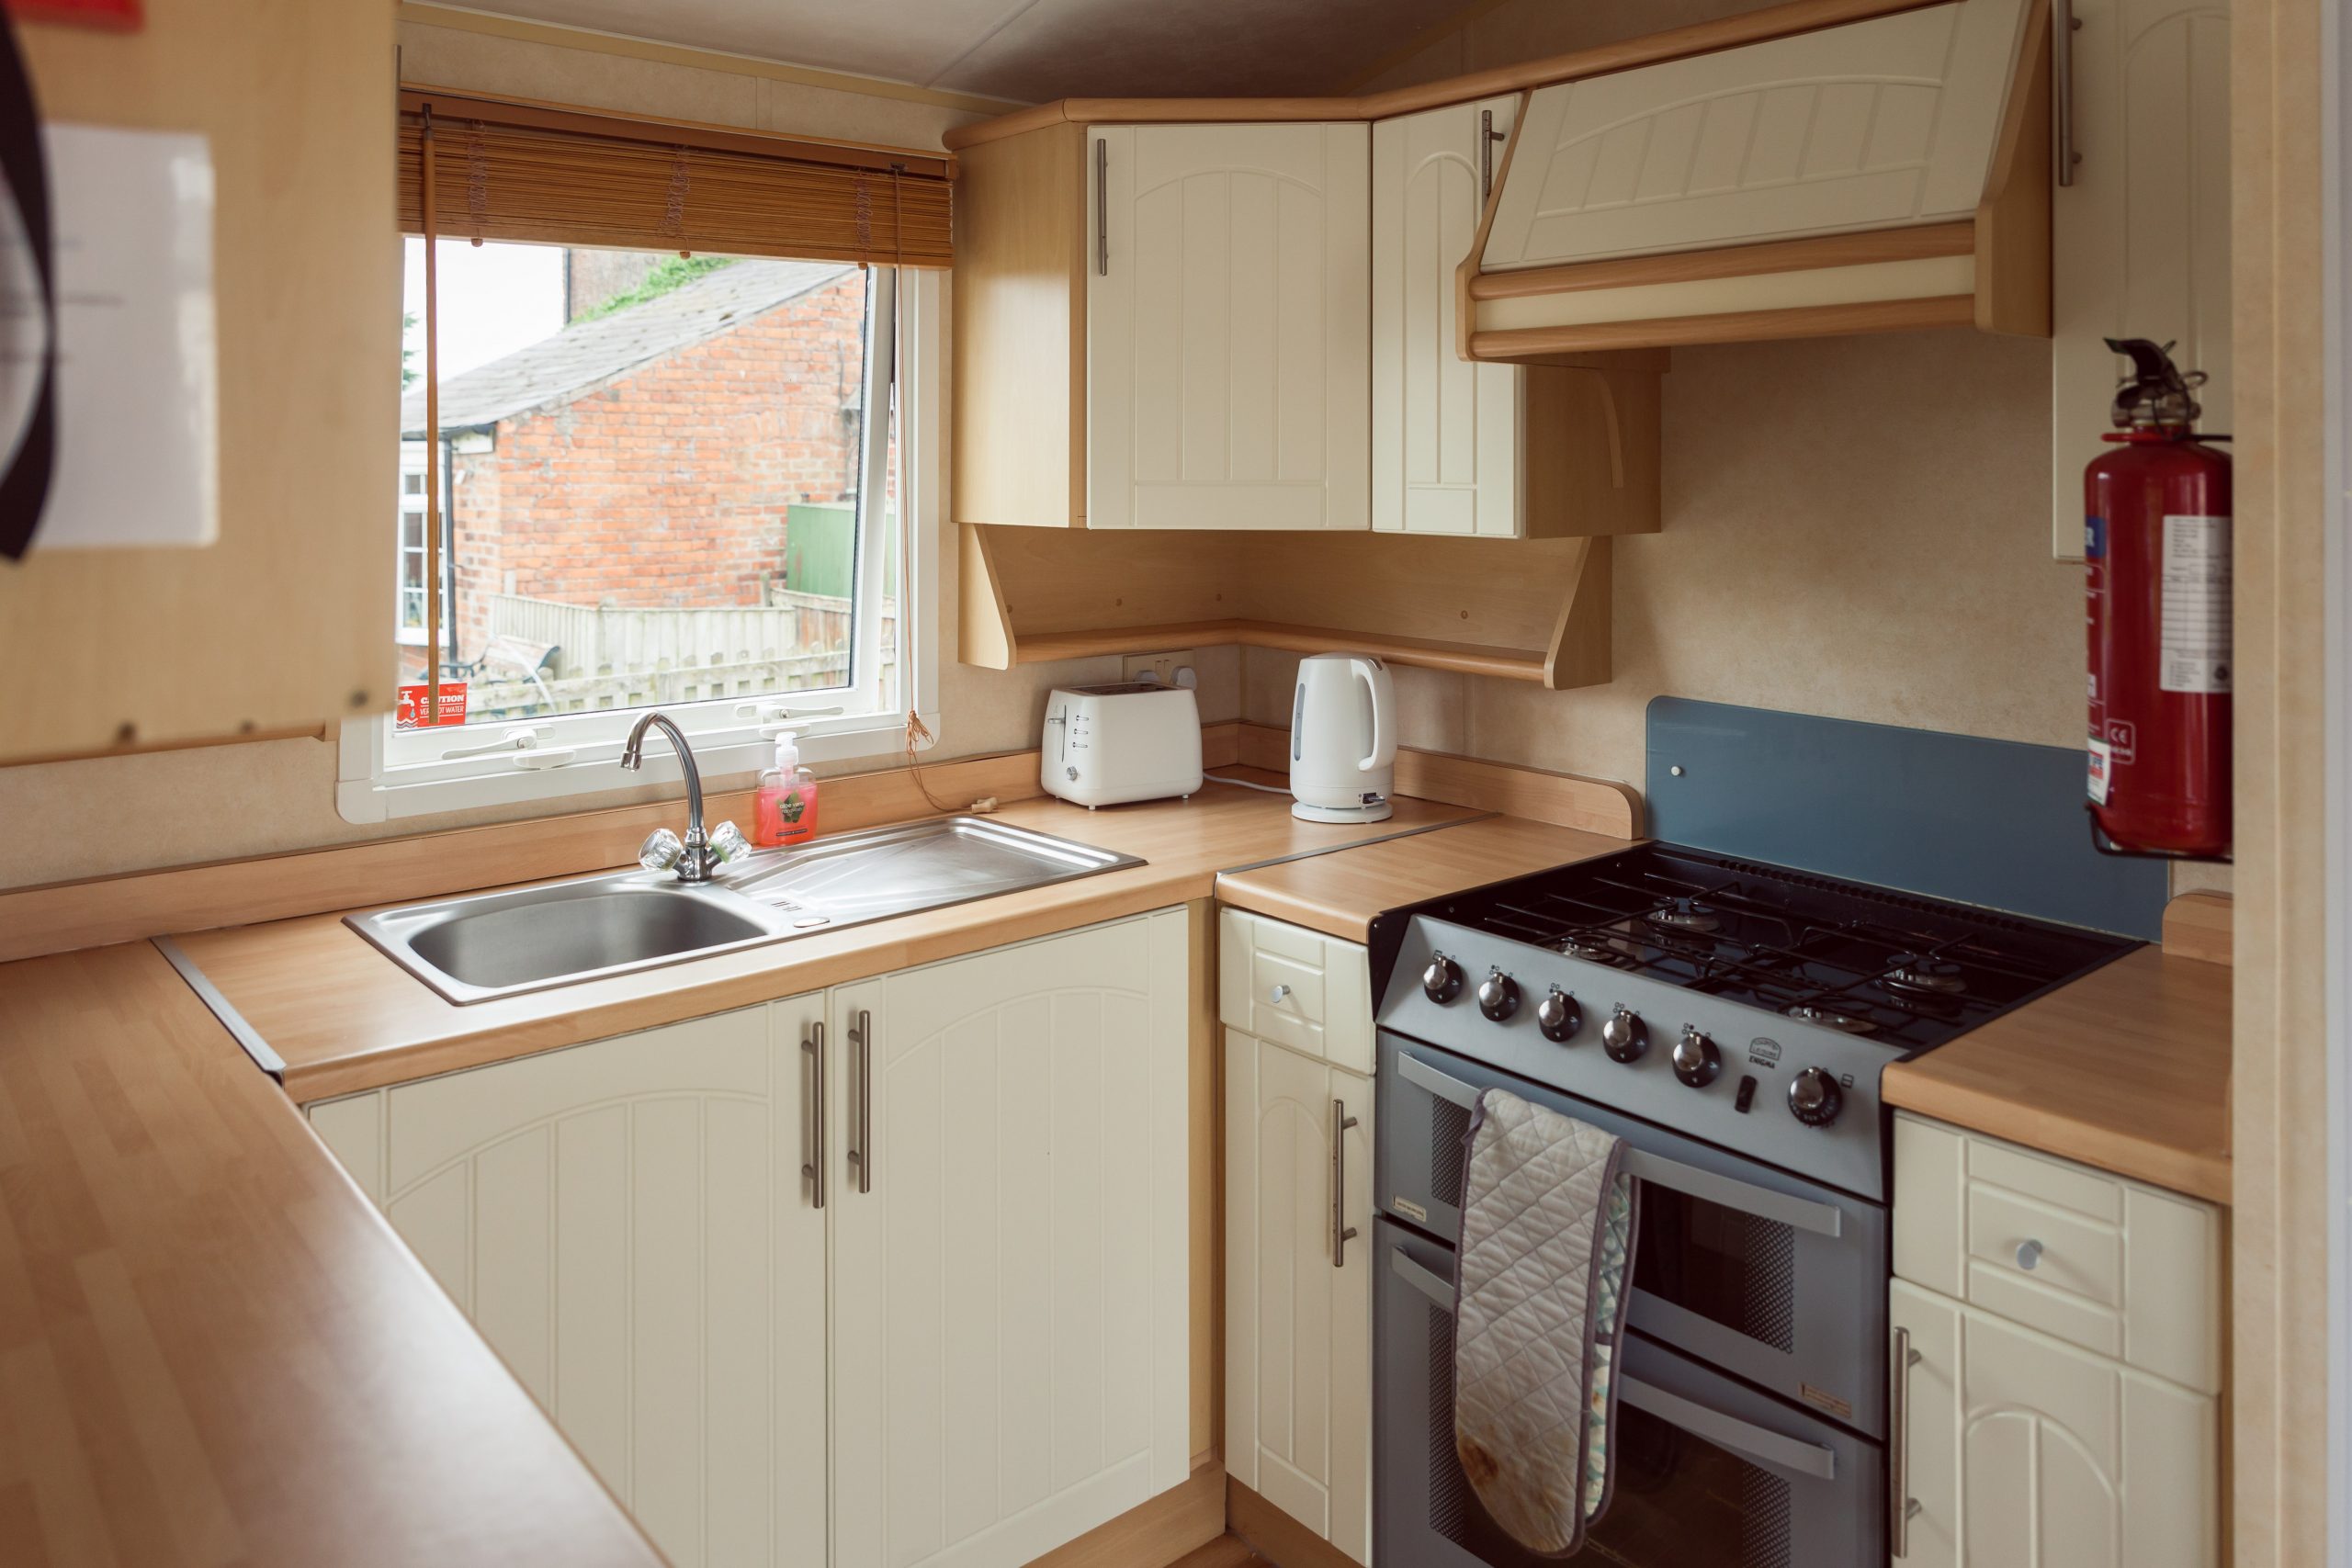 Pitch and Canvas | Glamping and Camping in Cheshire | Caravan kitchen